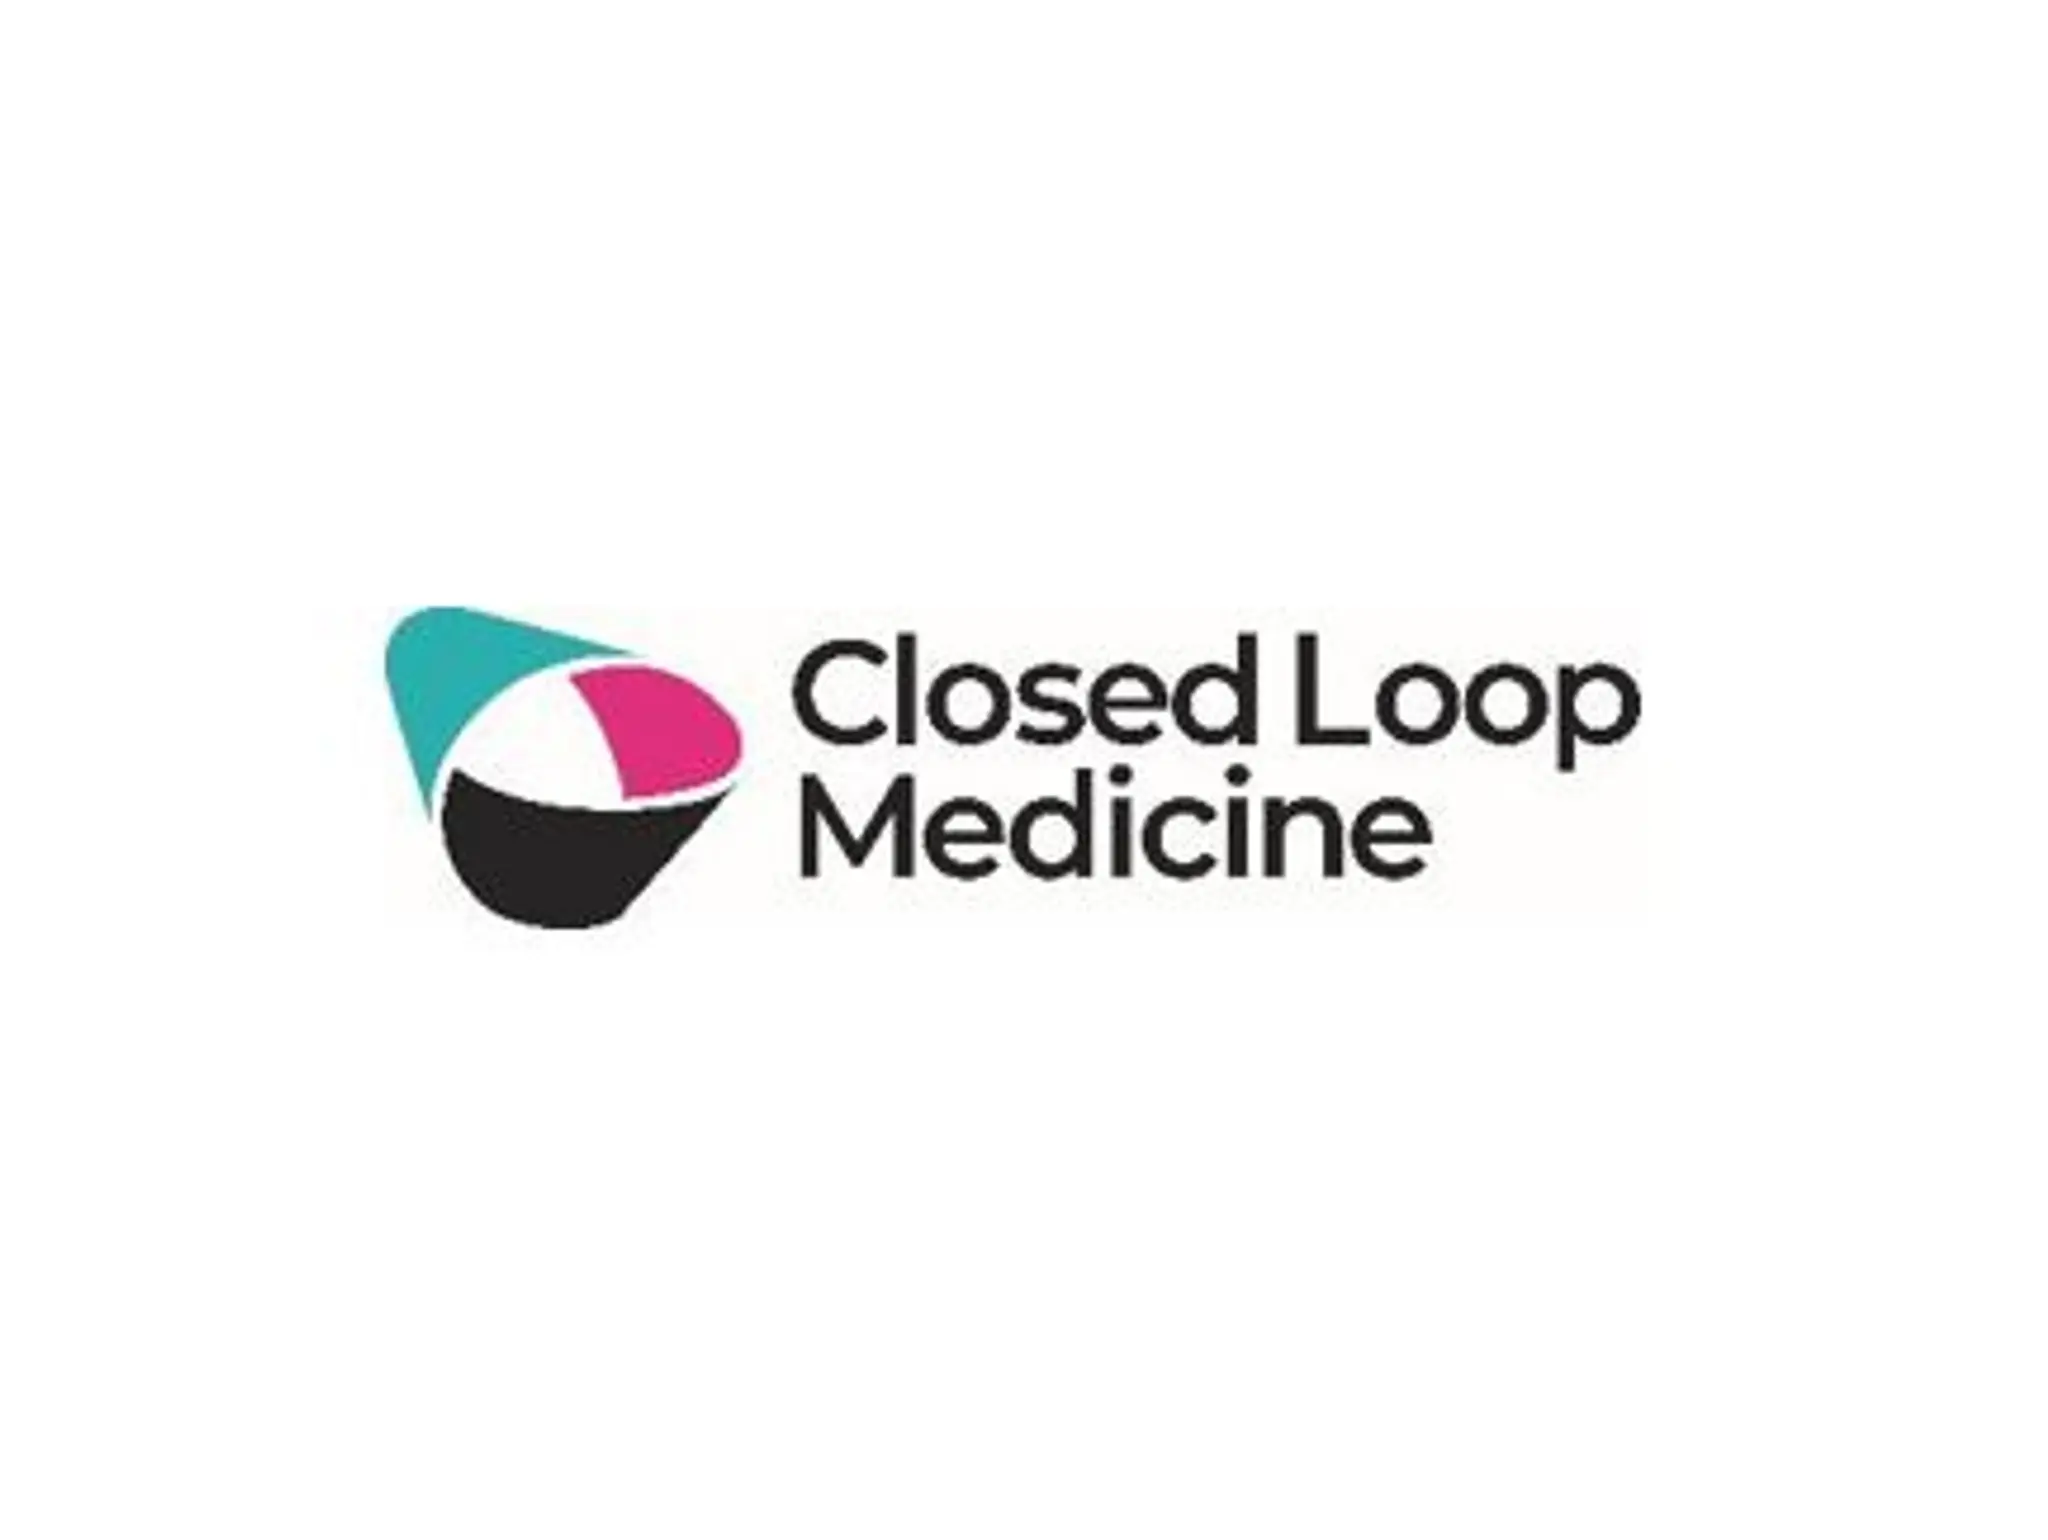 Closed Loop Medicine demonstrates application of novel drug plus software product for personalized 